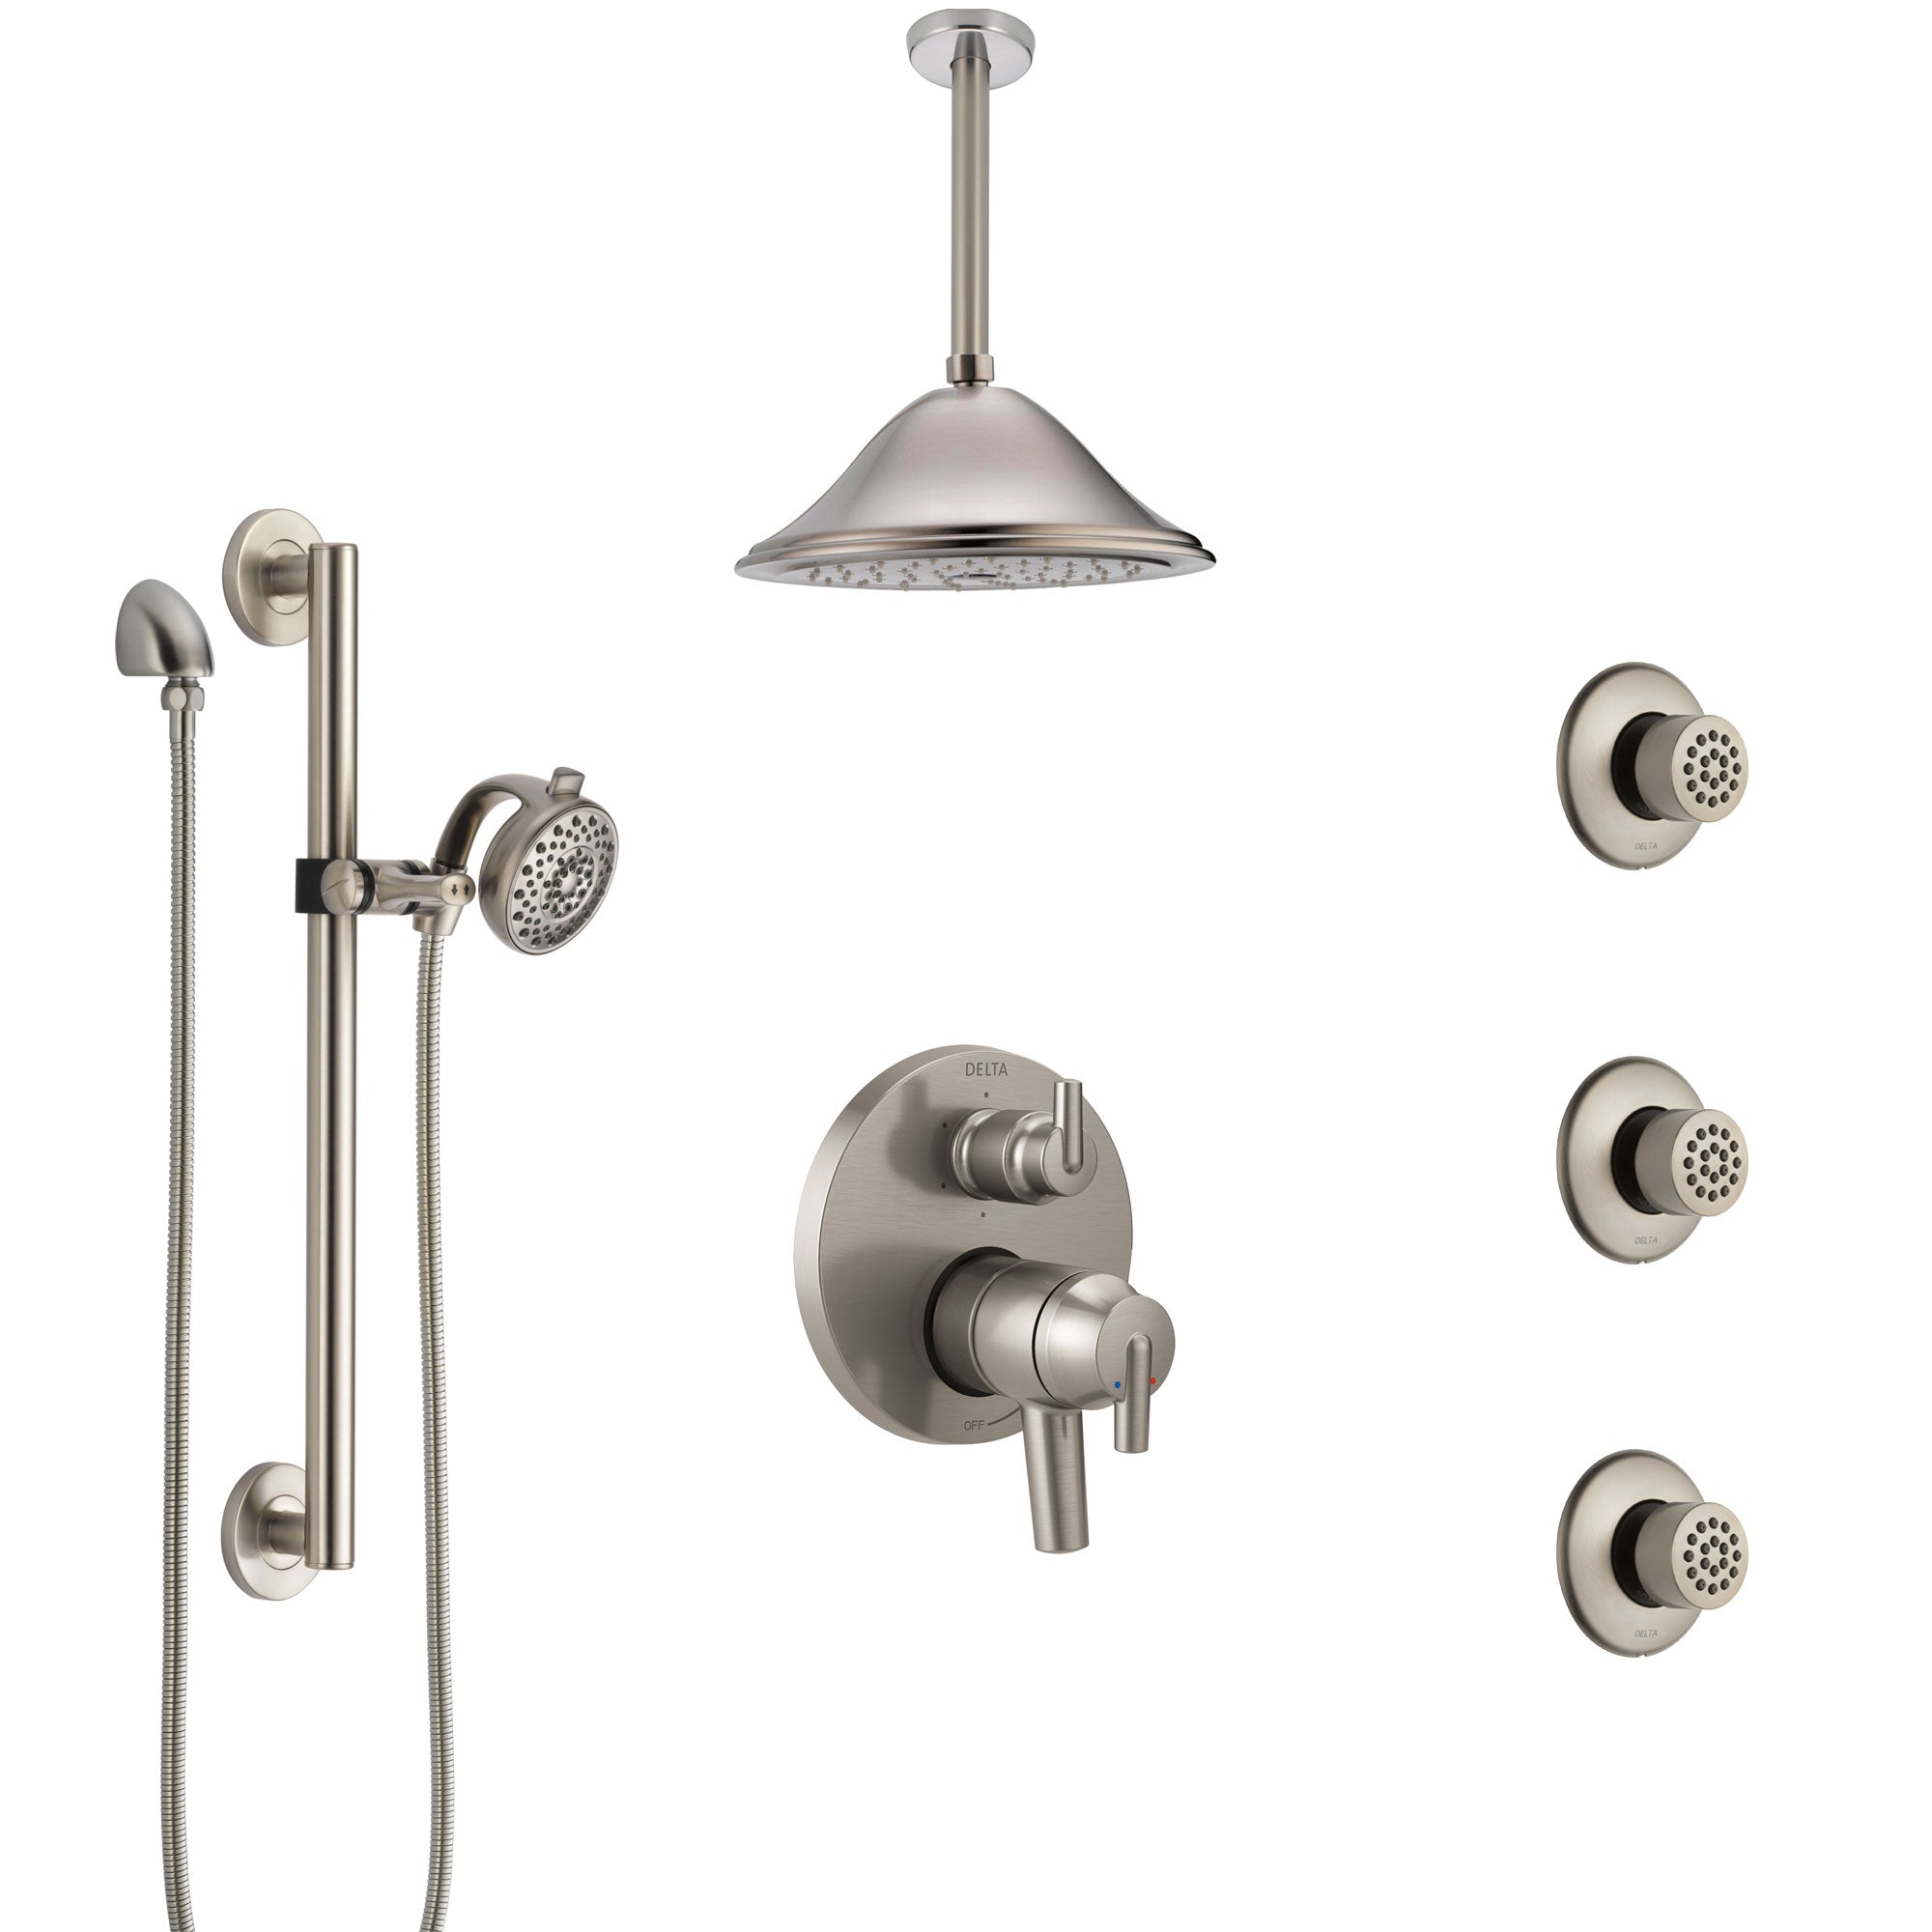 Delta Trinsic Dual Control Handle Stainless Steel Finish Shower System, Ceiling Showerhead, 3 Body Jets, Grab Bar Hand Spray SS27959SS8